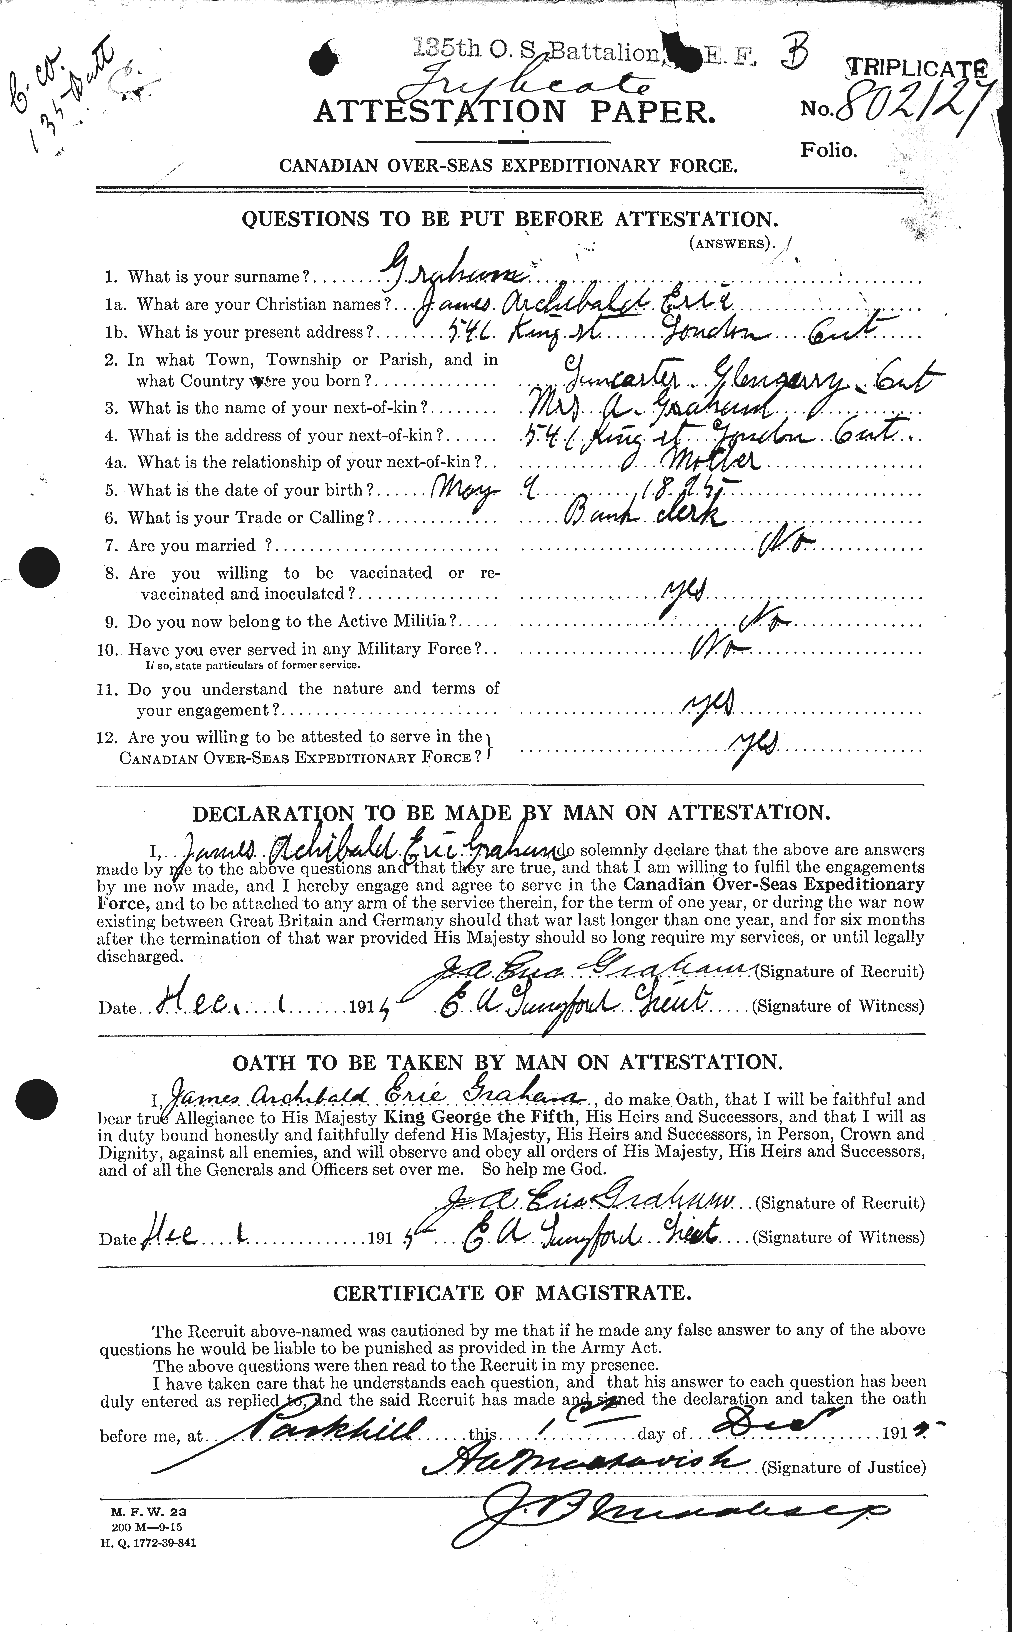 Personnel Records of the First World War - CEF 357804a